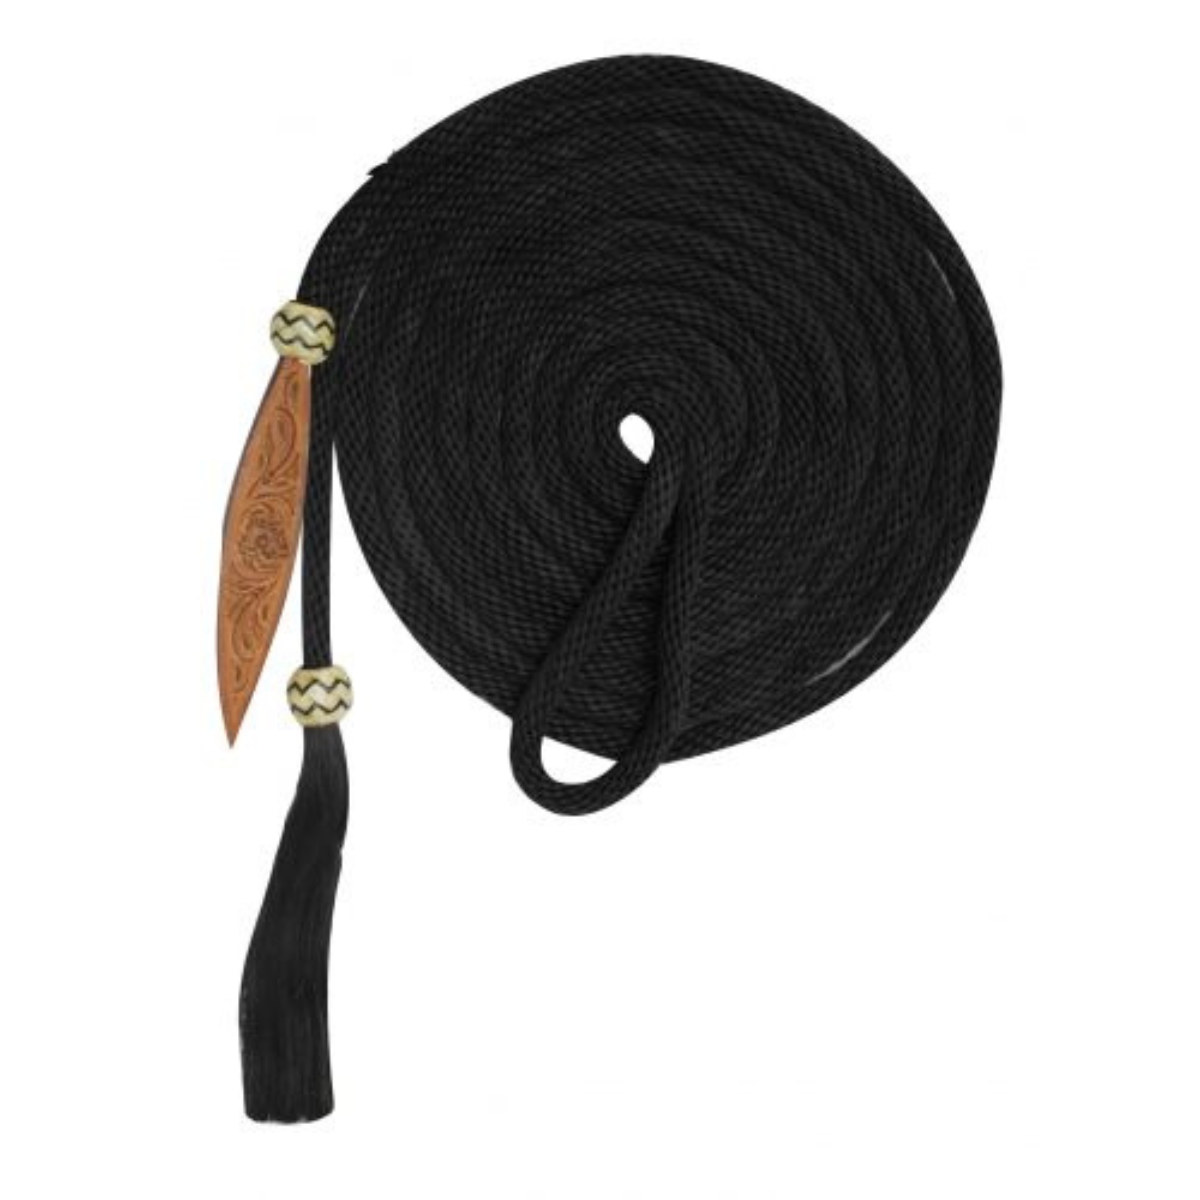 Showman® 21' Nylon Mecate Reins with Horse Hair Tassel and Leather Popper. - Double T Saddles